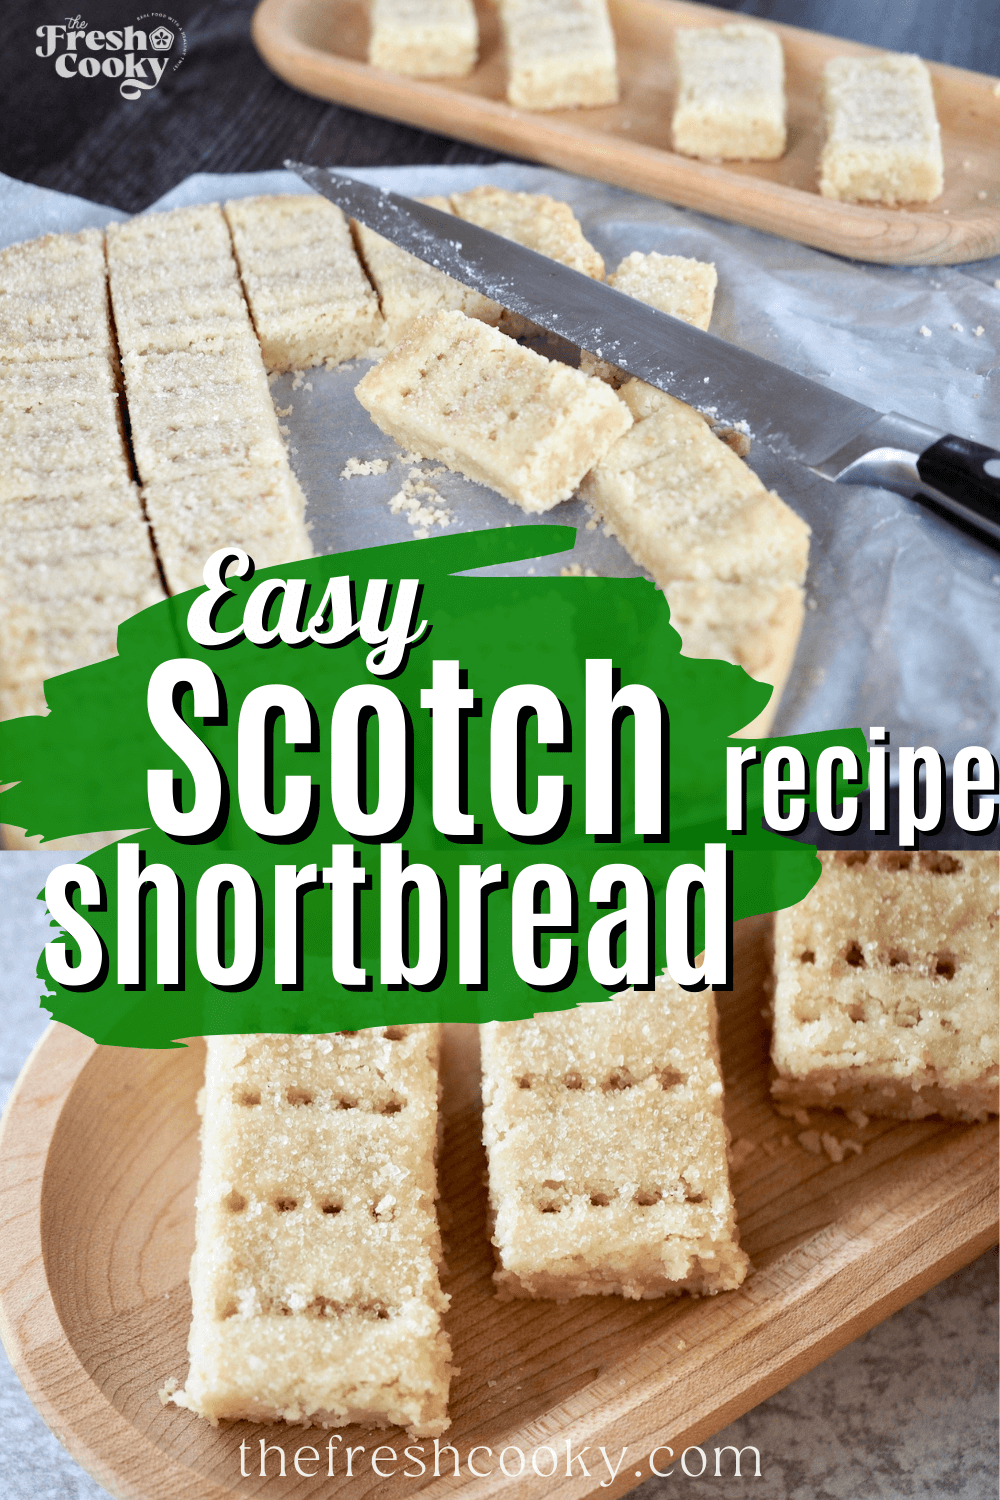 https://www.thefreshcooky.com/wp-content/uploads/2020/11/Scotch-Shortbread-pin-1.png